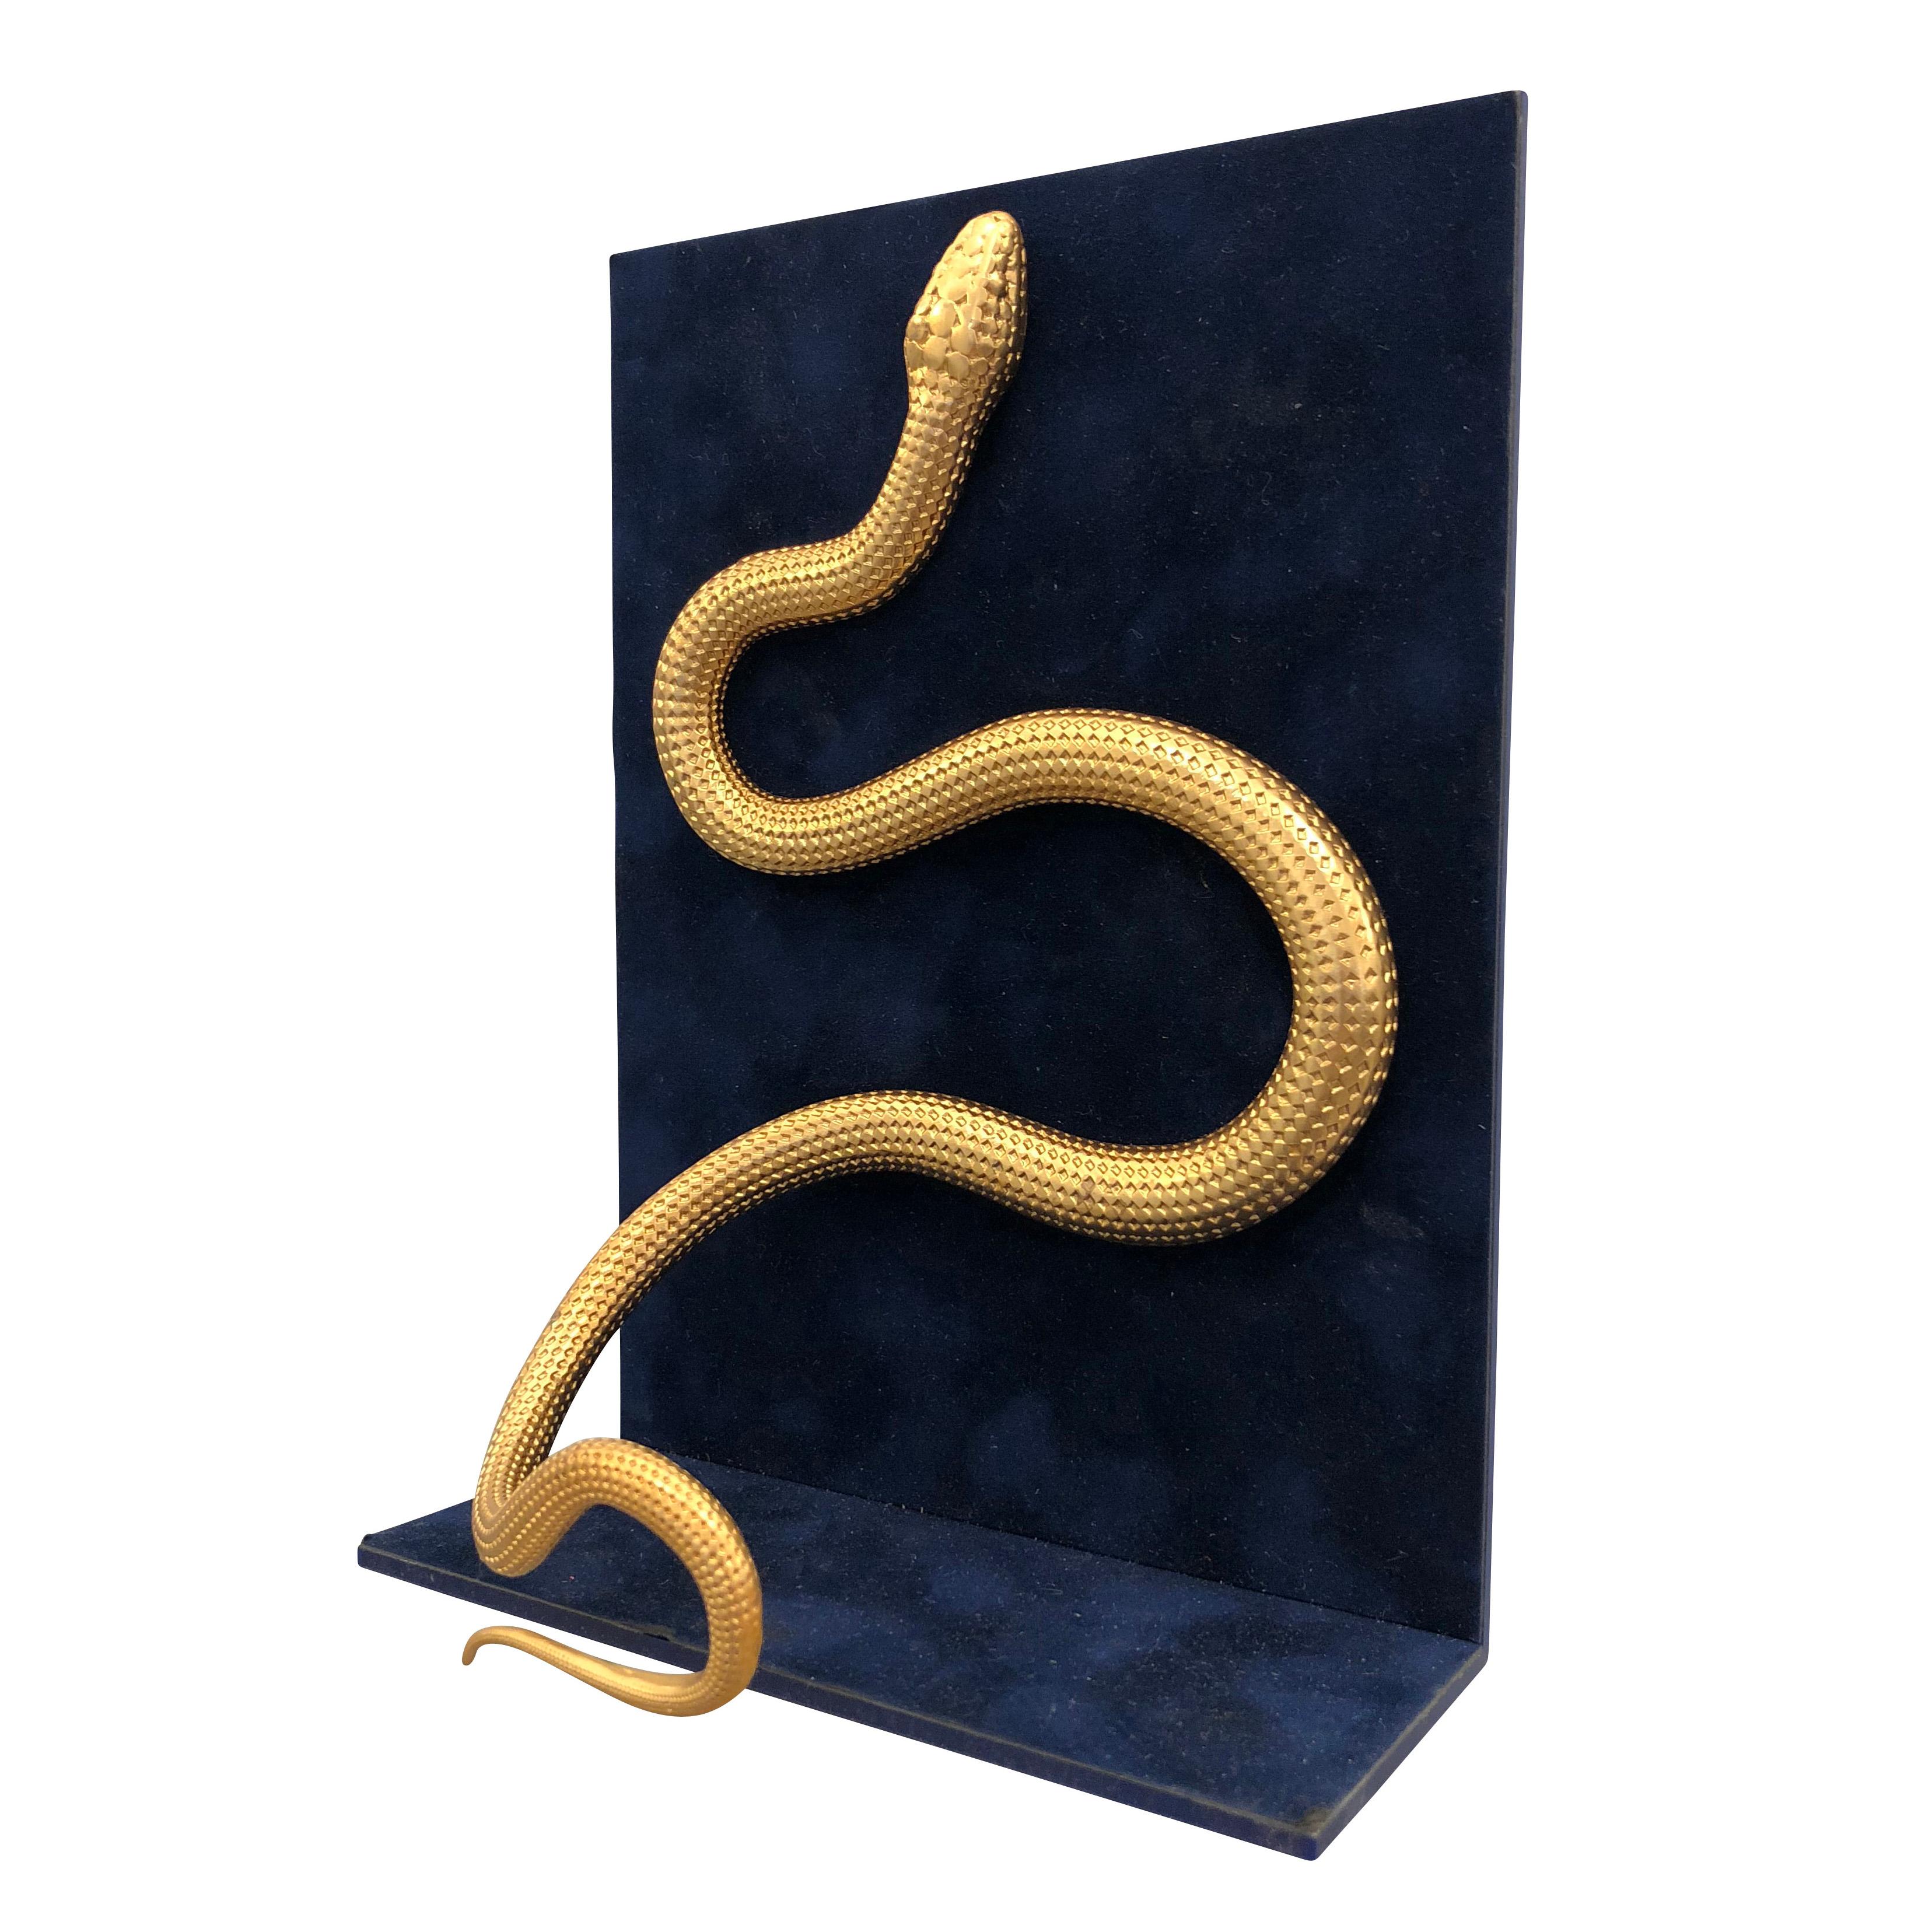 Pair of book ends with brass snakes on a blue velvet covered Lucite backing.

Condition: Excellent vintage condition, minor wear consistent with age and use

Width: 6”

Depth: 3”

Height: 8”

Ref#:OFZ26.